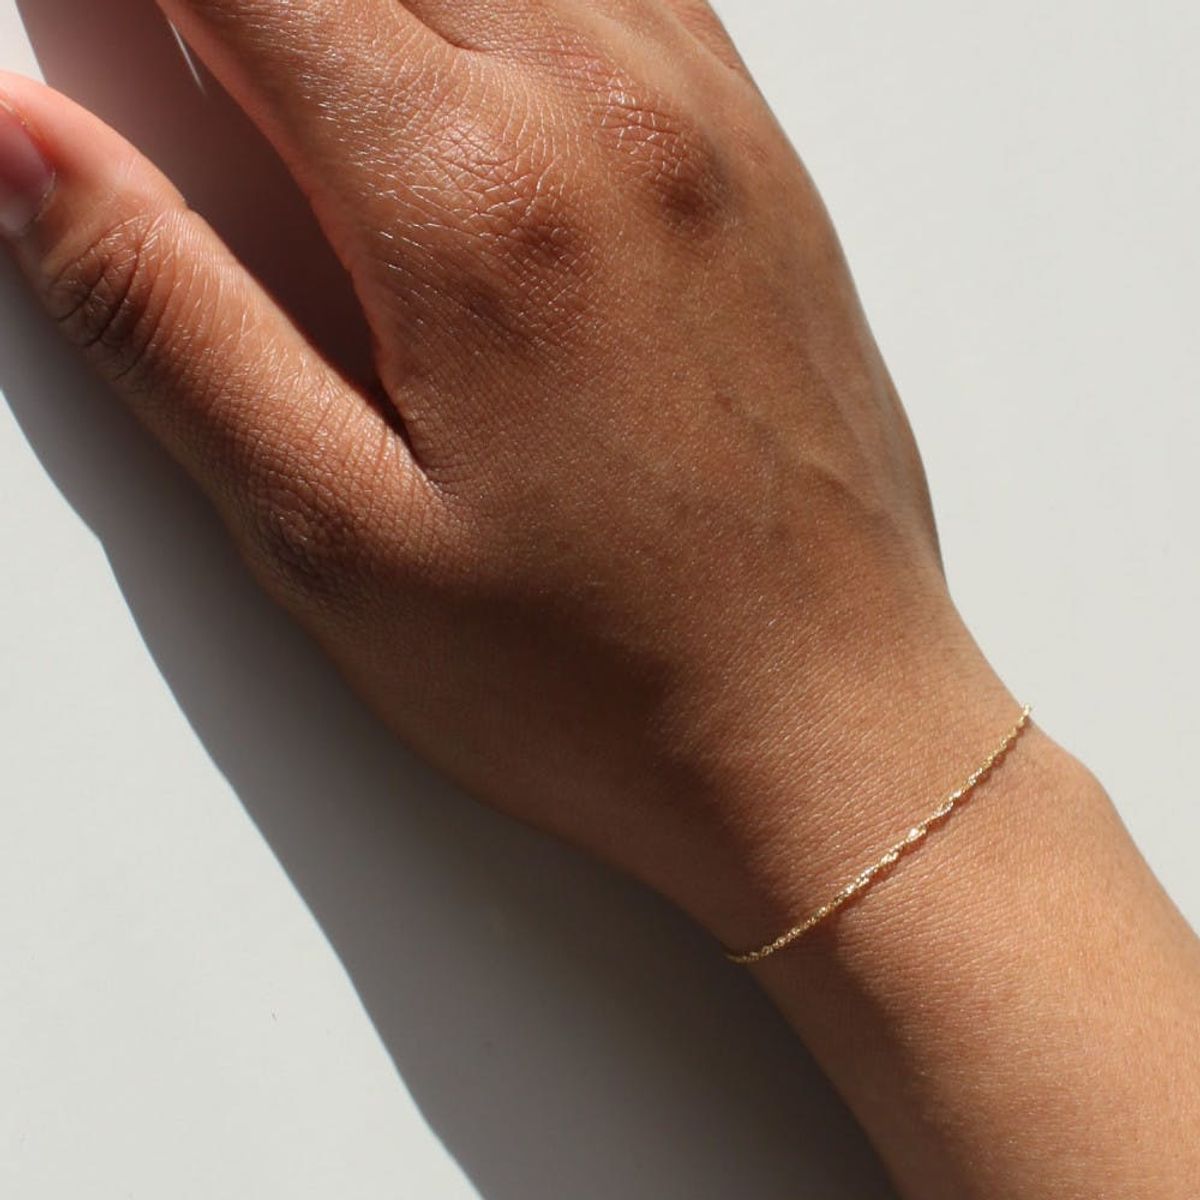 Catbird Is Offering “Permanent Jewelry” for Under $100